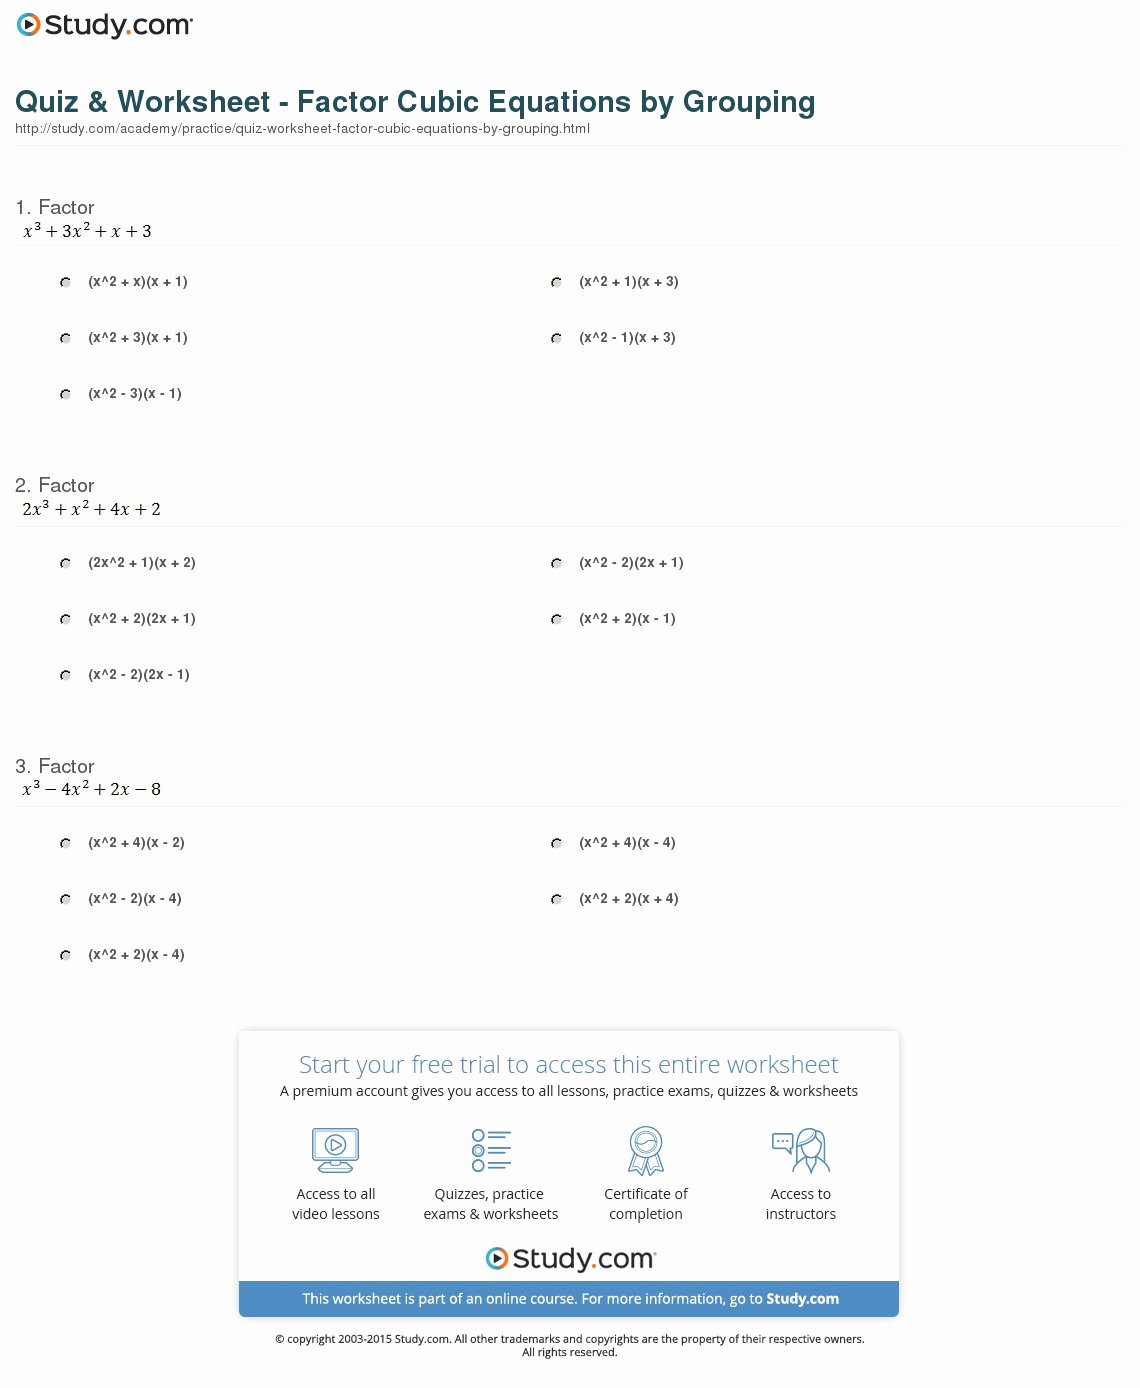 Factoring by Grouping Worksheet Answers Lovely Quiz &amp; Worksheet Factor Cubic Equations by Grouping